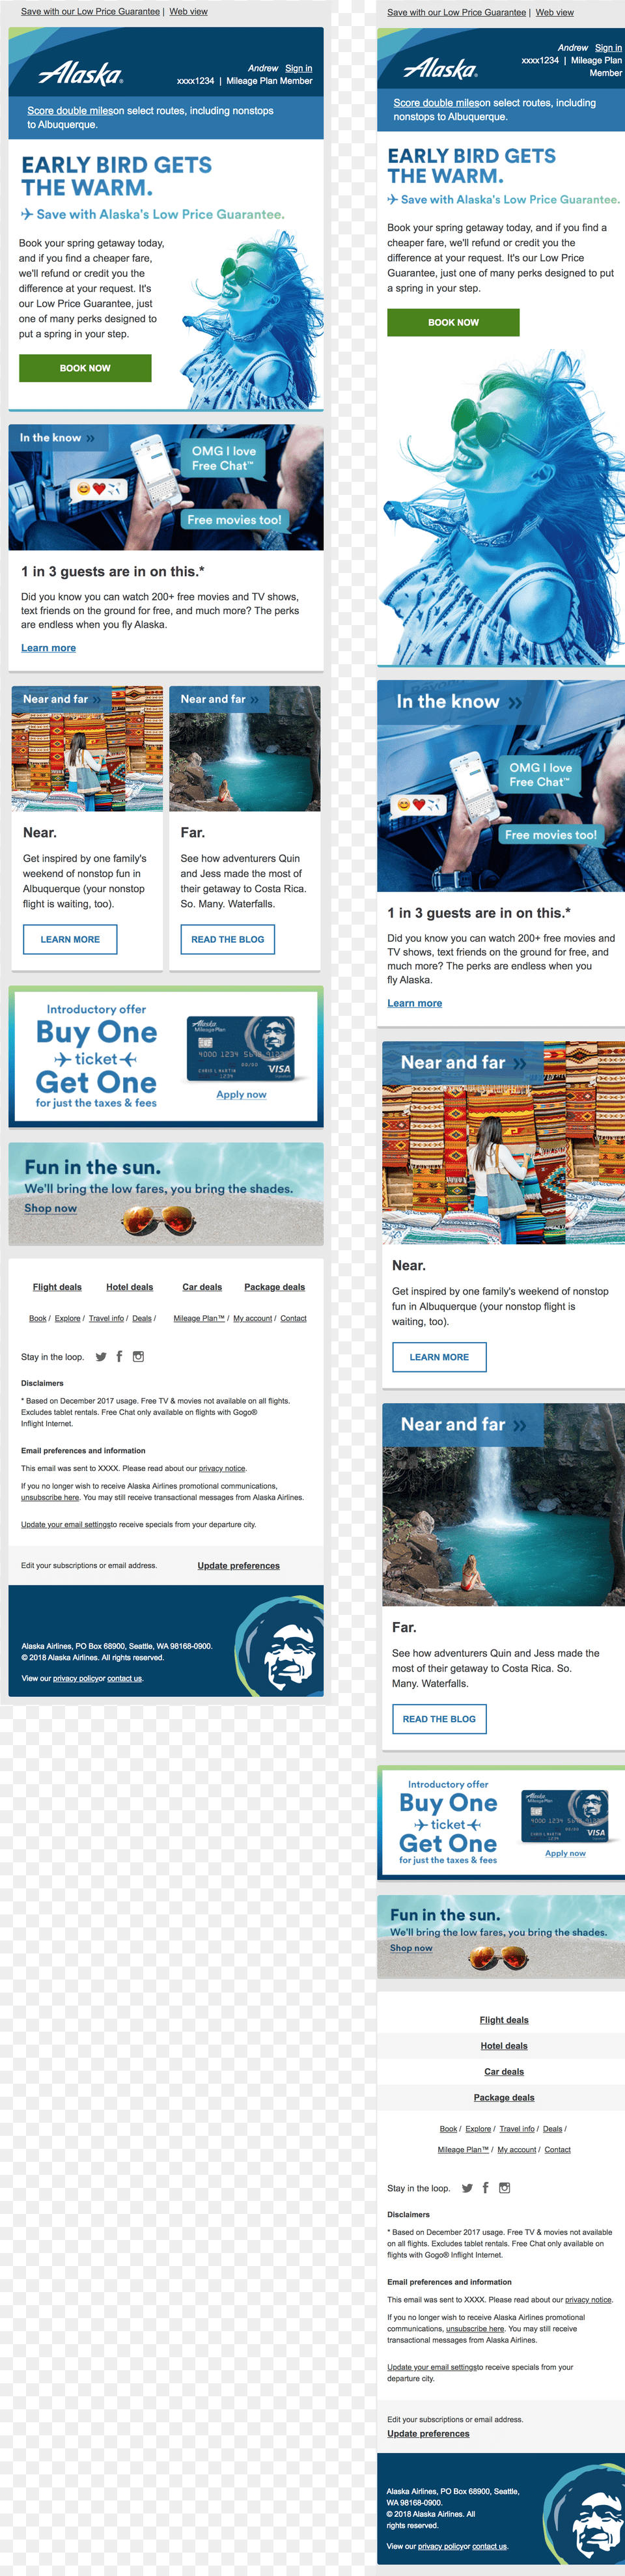 Beautiful Responsive Email From Alaska Airlines Online Advertising Png Image